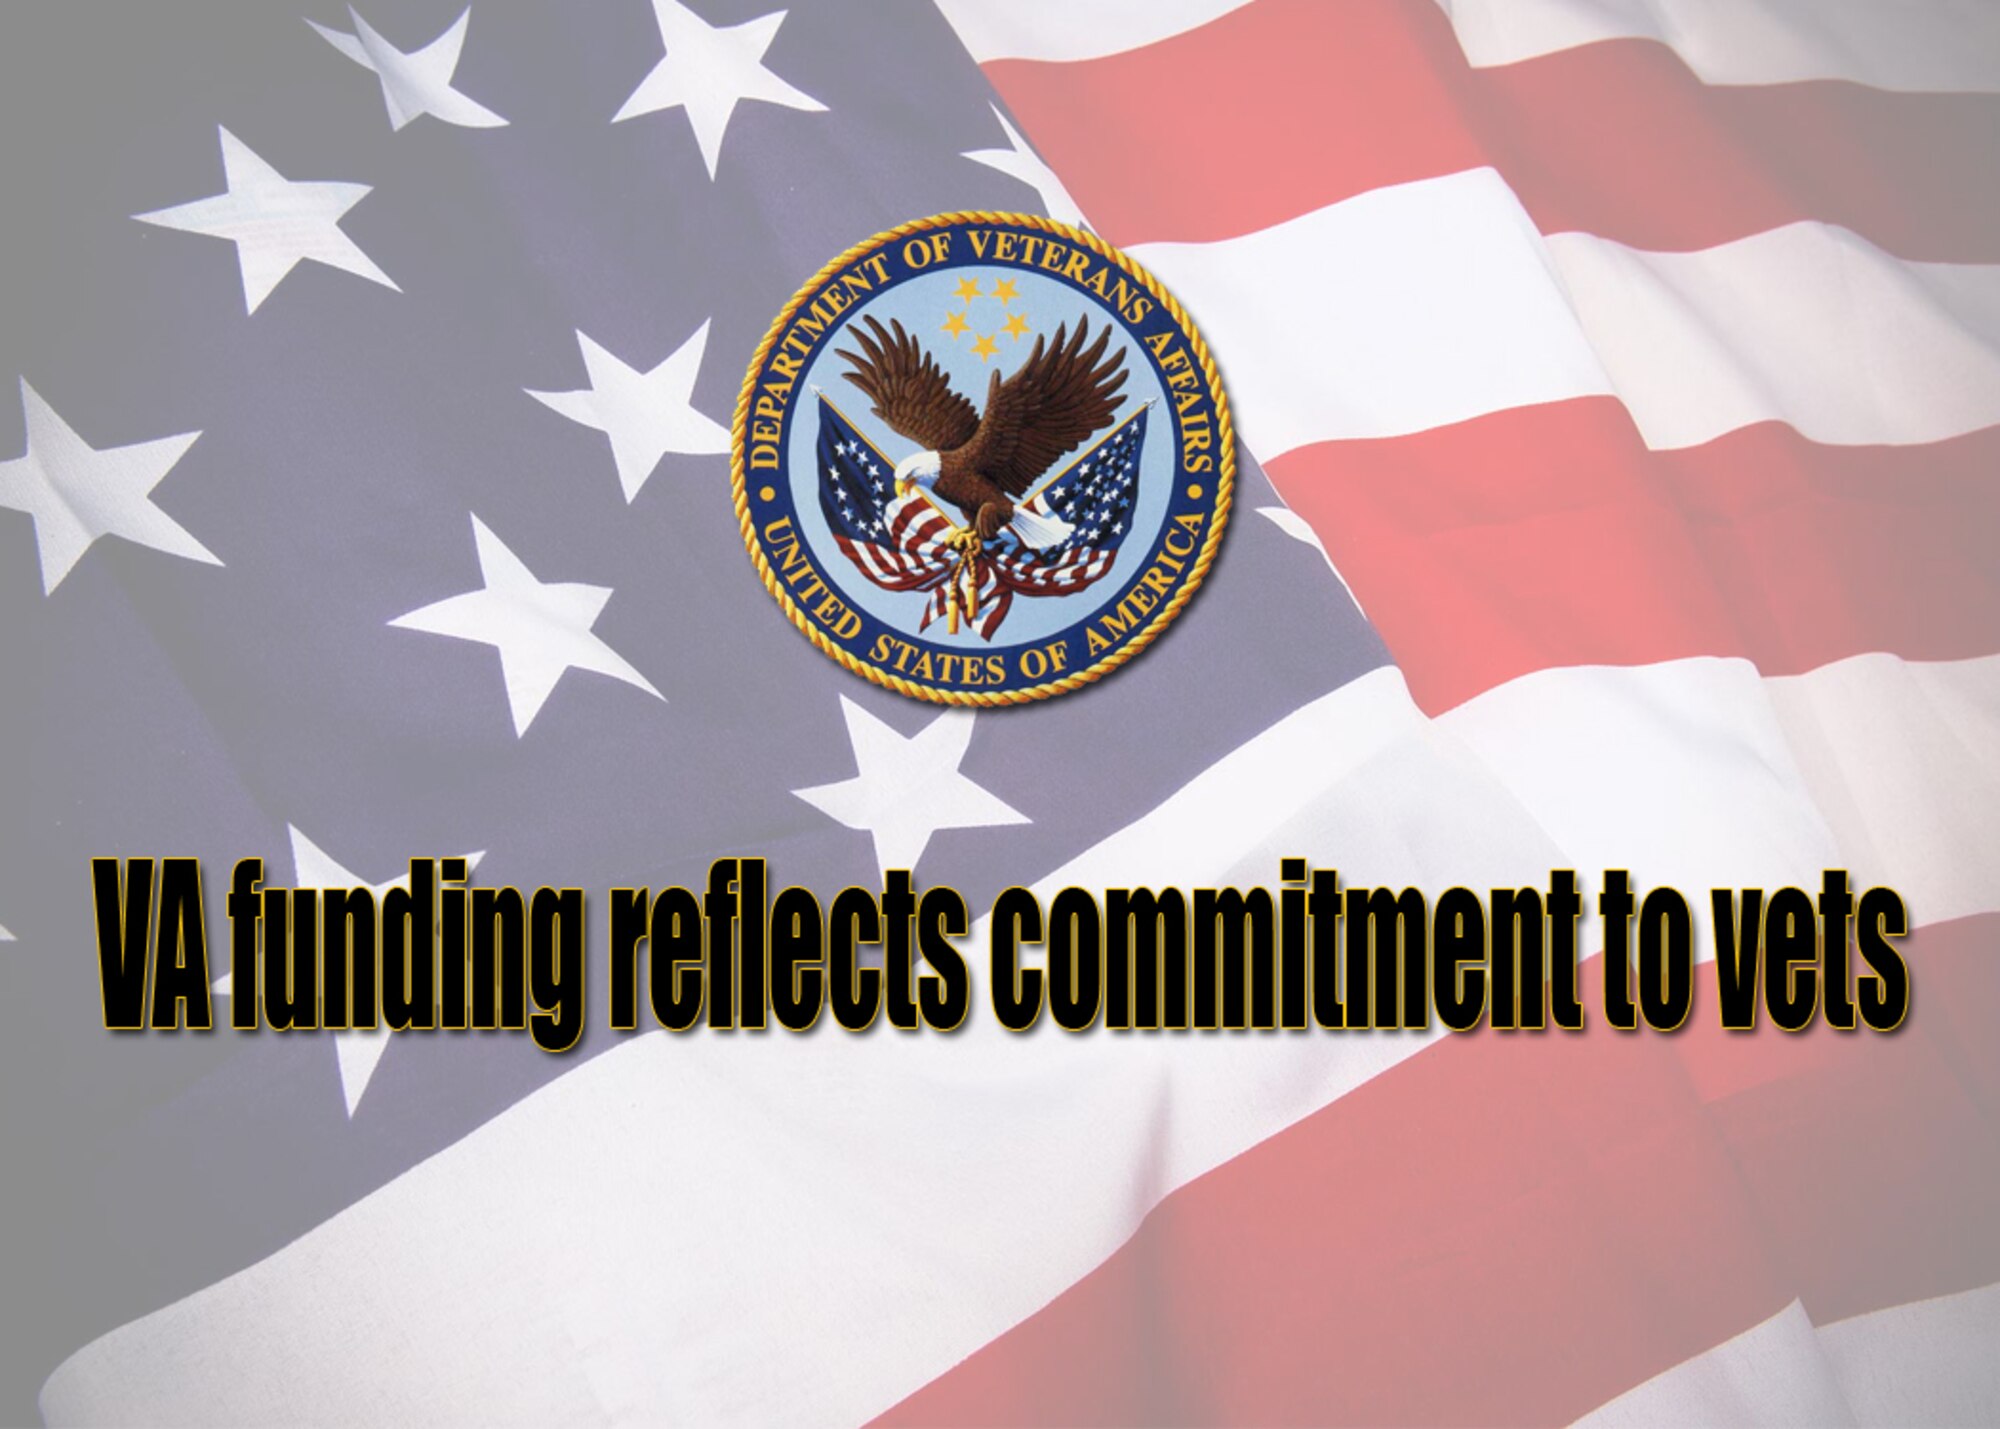 VA funding reflects commitment to vets.

